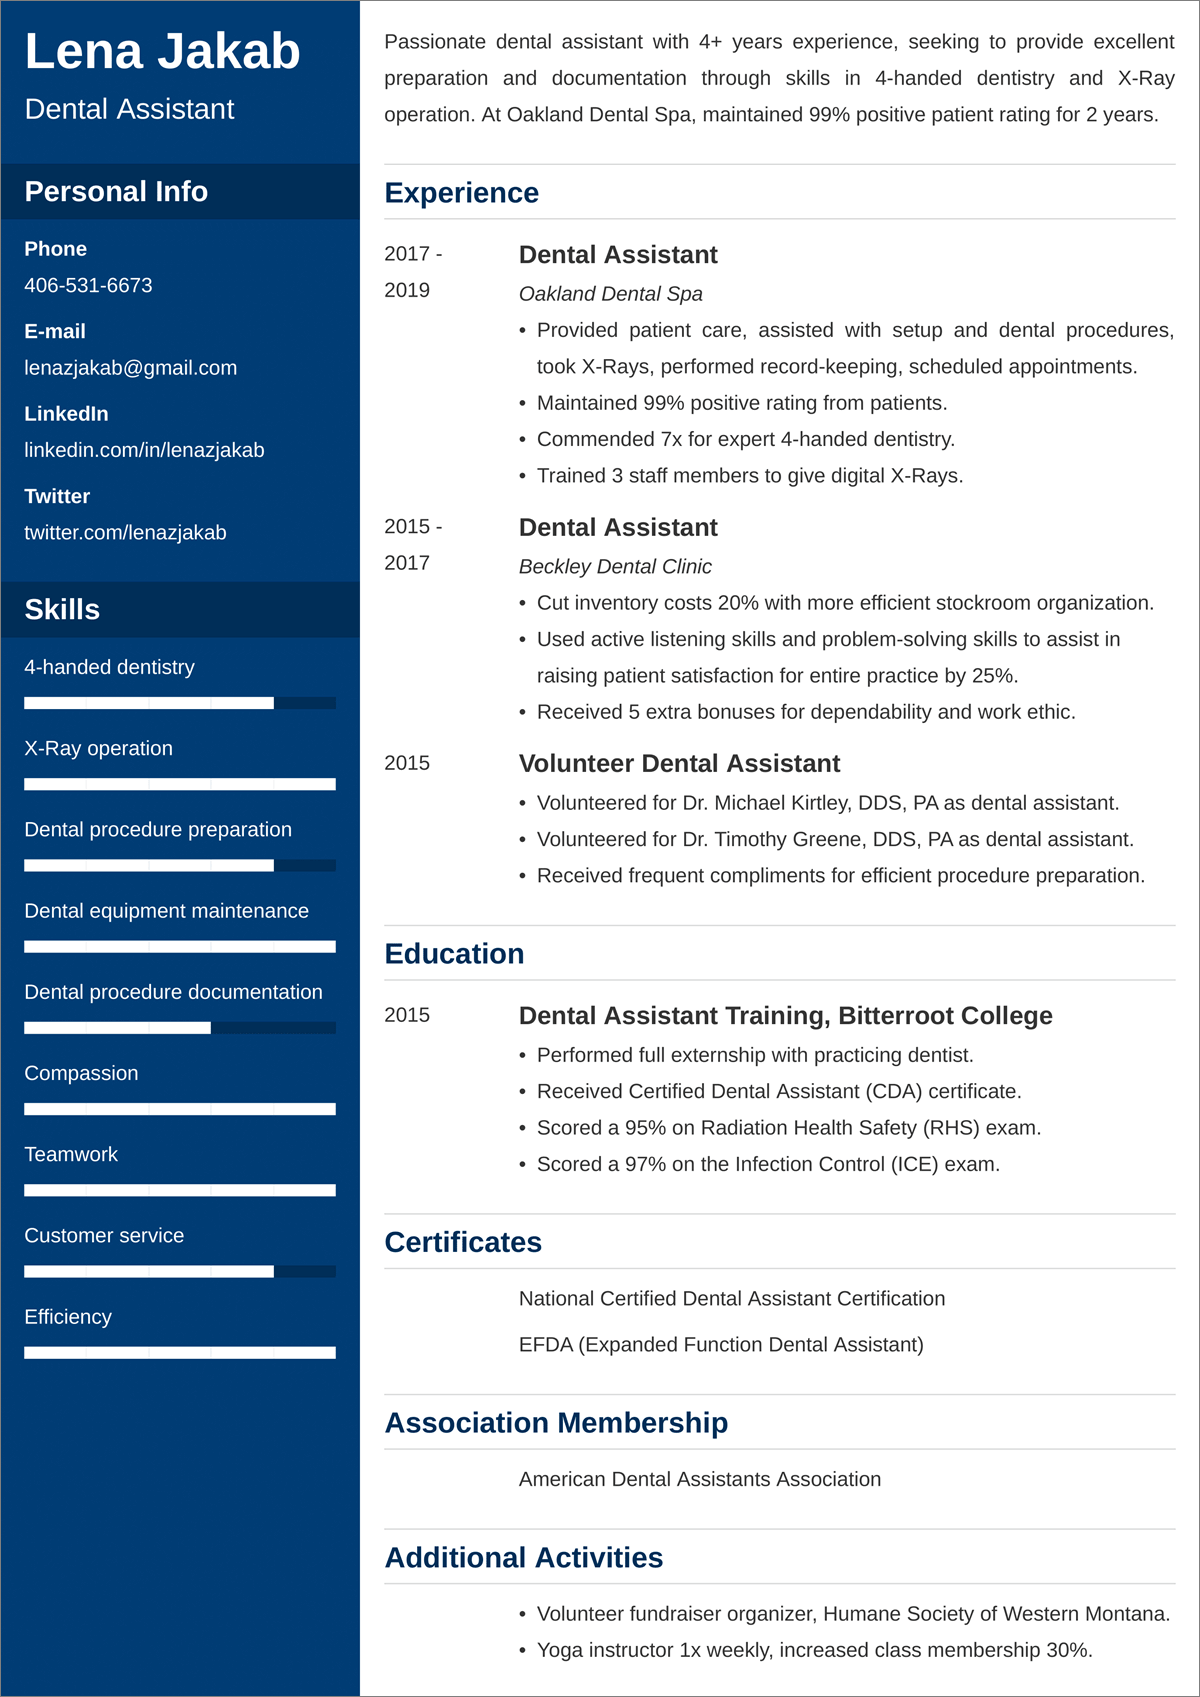 Dental Assistant Resume Sample—20+ Examples and Writing Tips